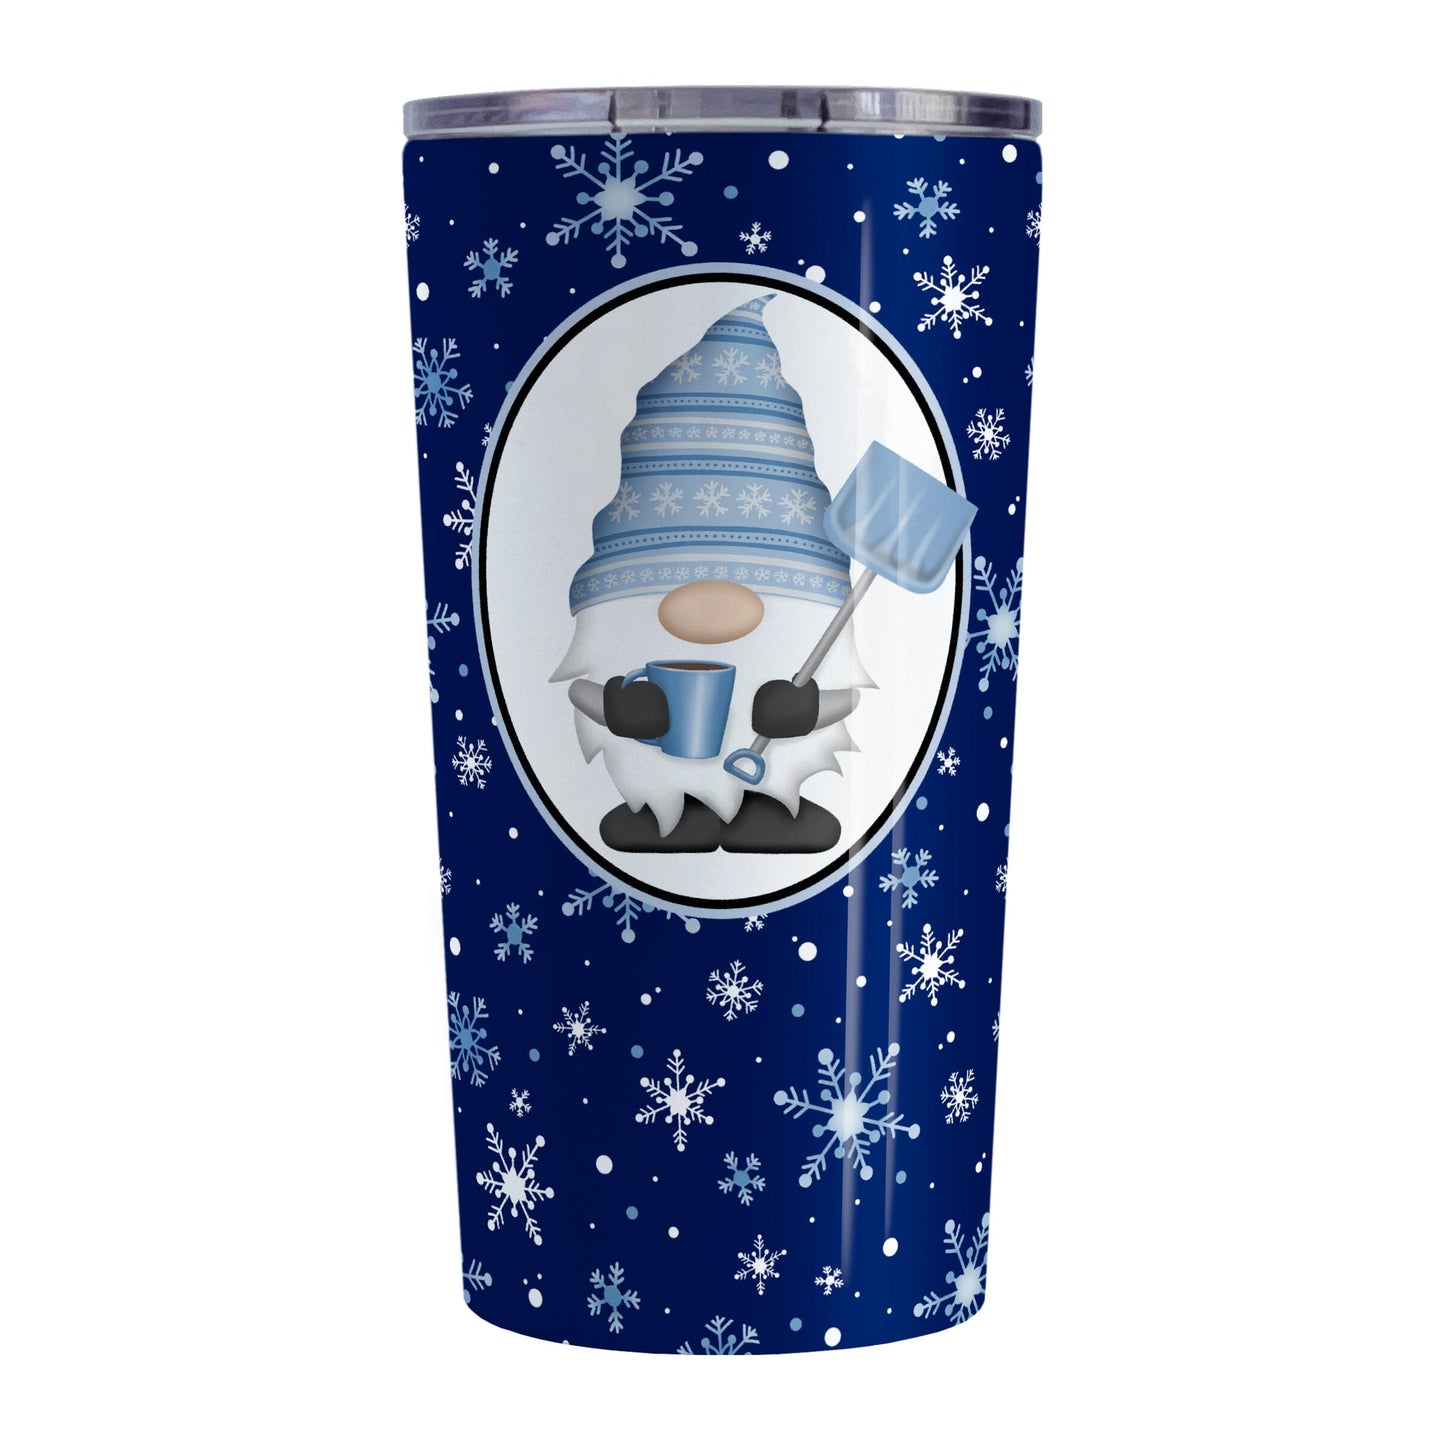 Blue Gnome Snowflakes Tumbler Cup (20oz) at Amy's Coffee Mugs. A stainless steel tumbler cup designed with an adorable gnome wearing a festive blue winter hat and holding a hot beverage and a snow shovel in a white oval over a blue night snowflakes background that wraps around the cup.